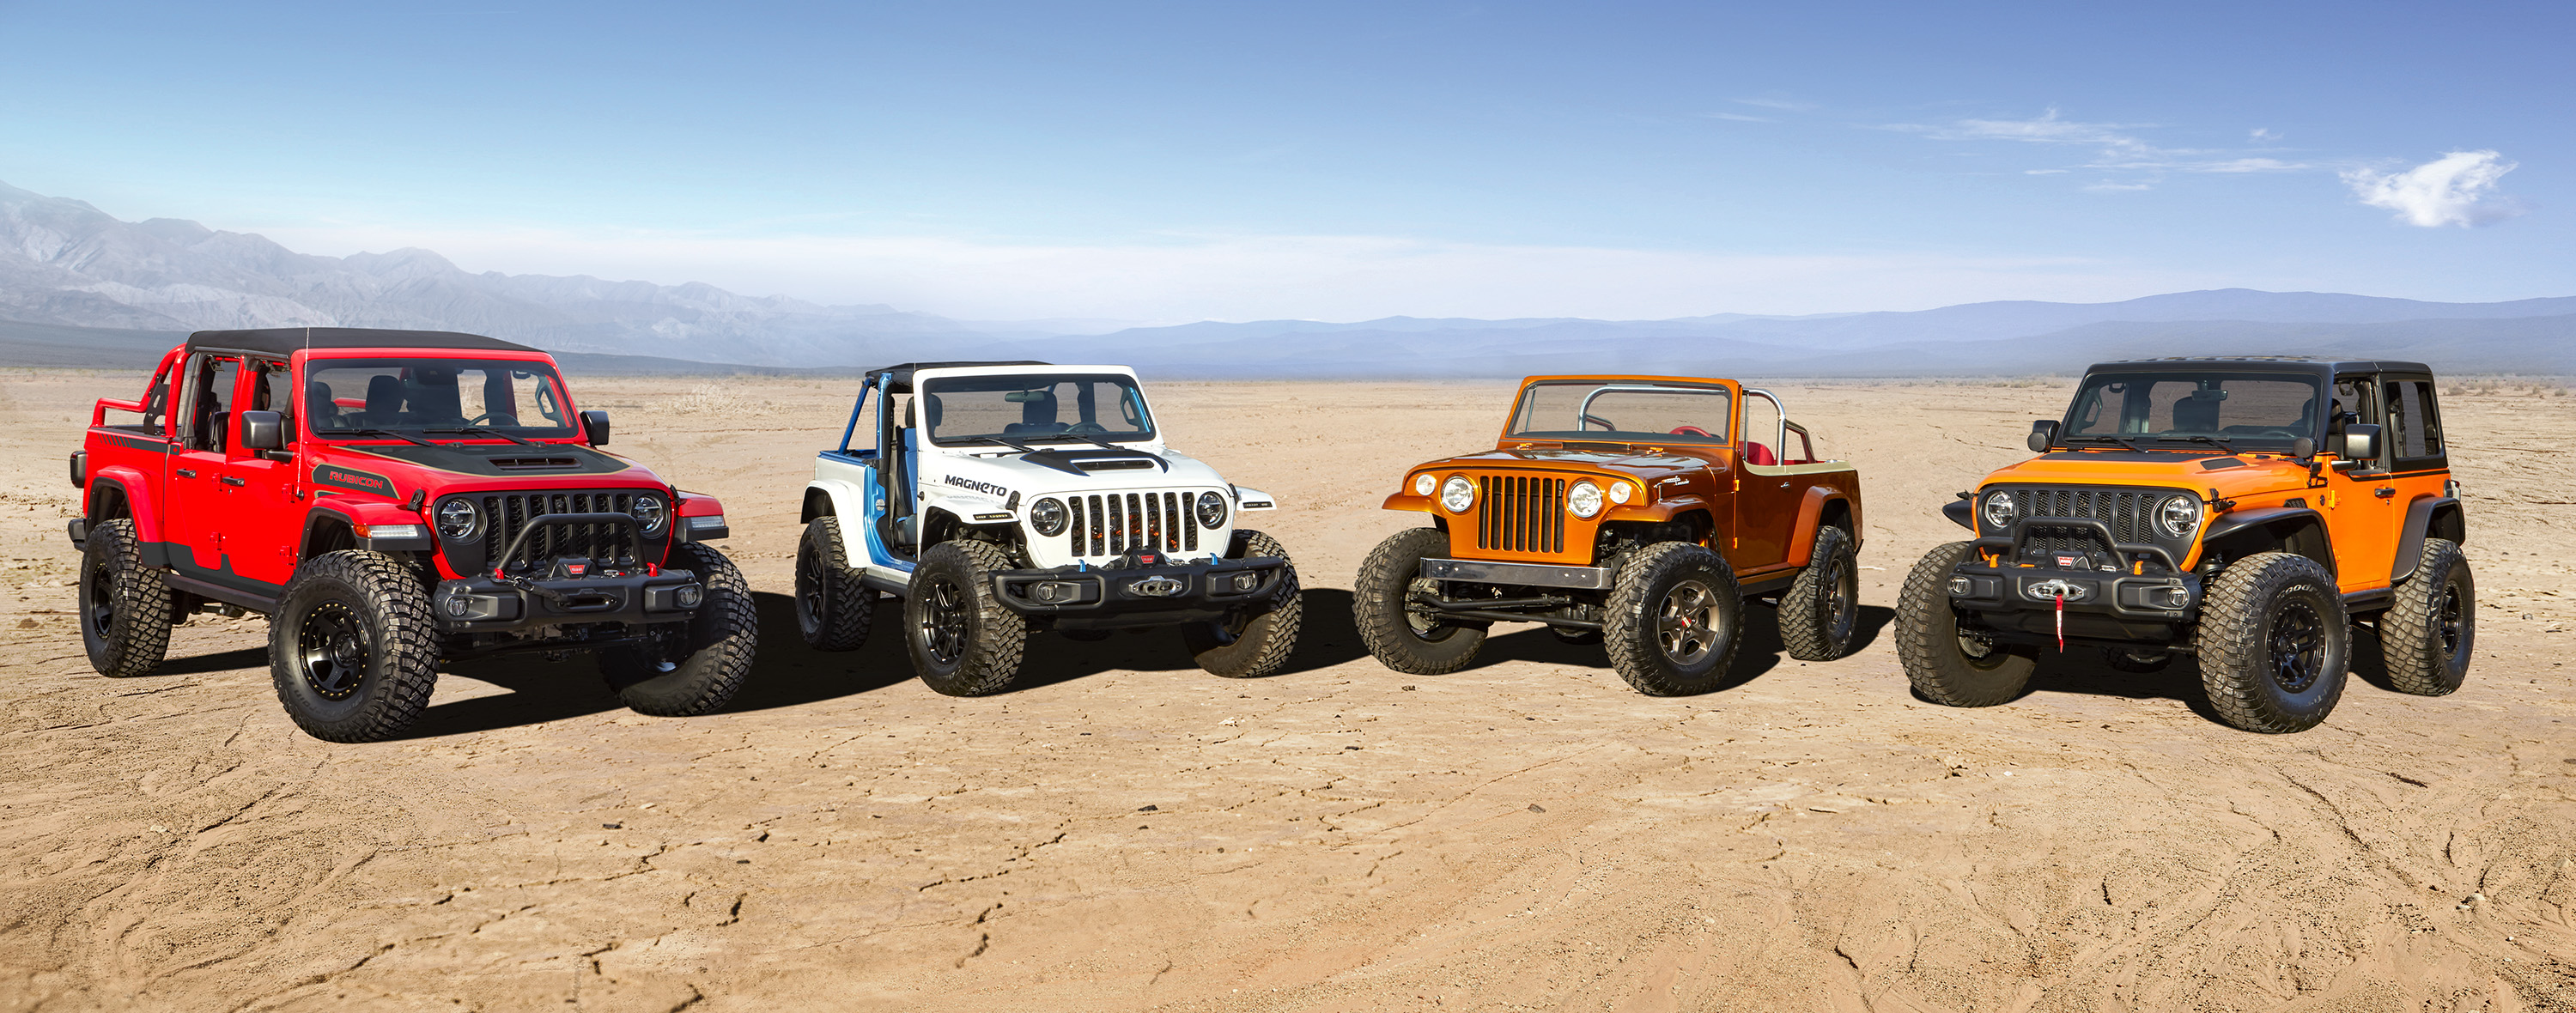 Jeep Creates Four New Off-Road Concept Vehicles for 2021 Moab Easter Jeep Safari